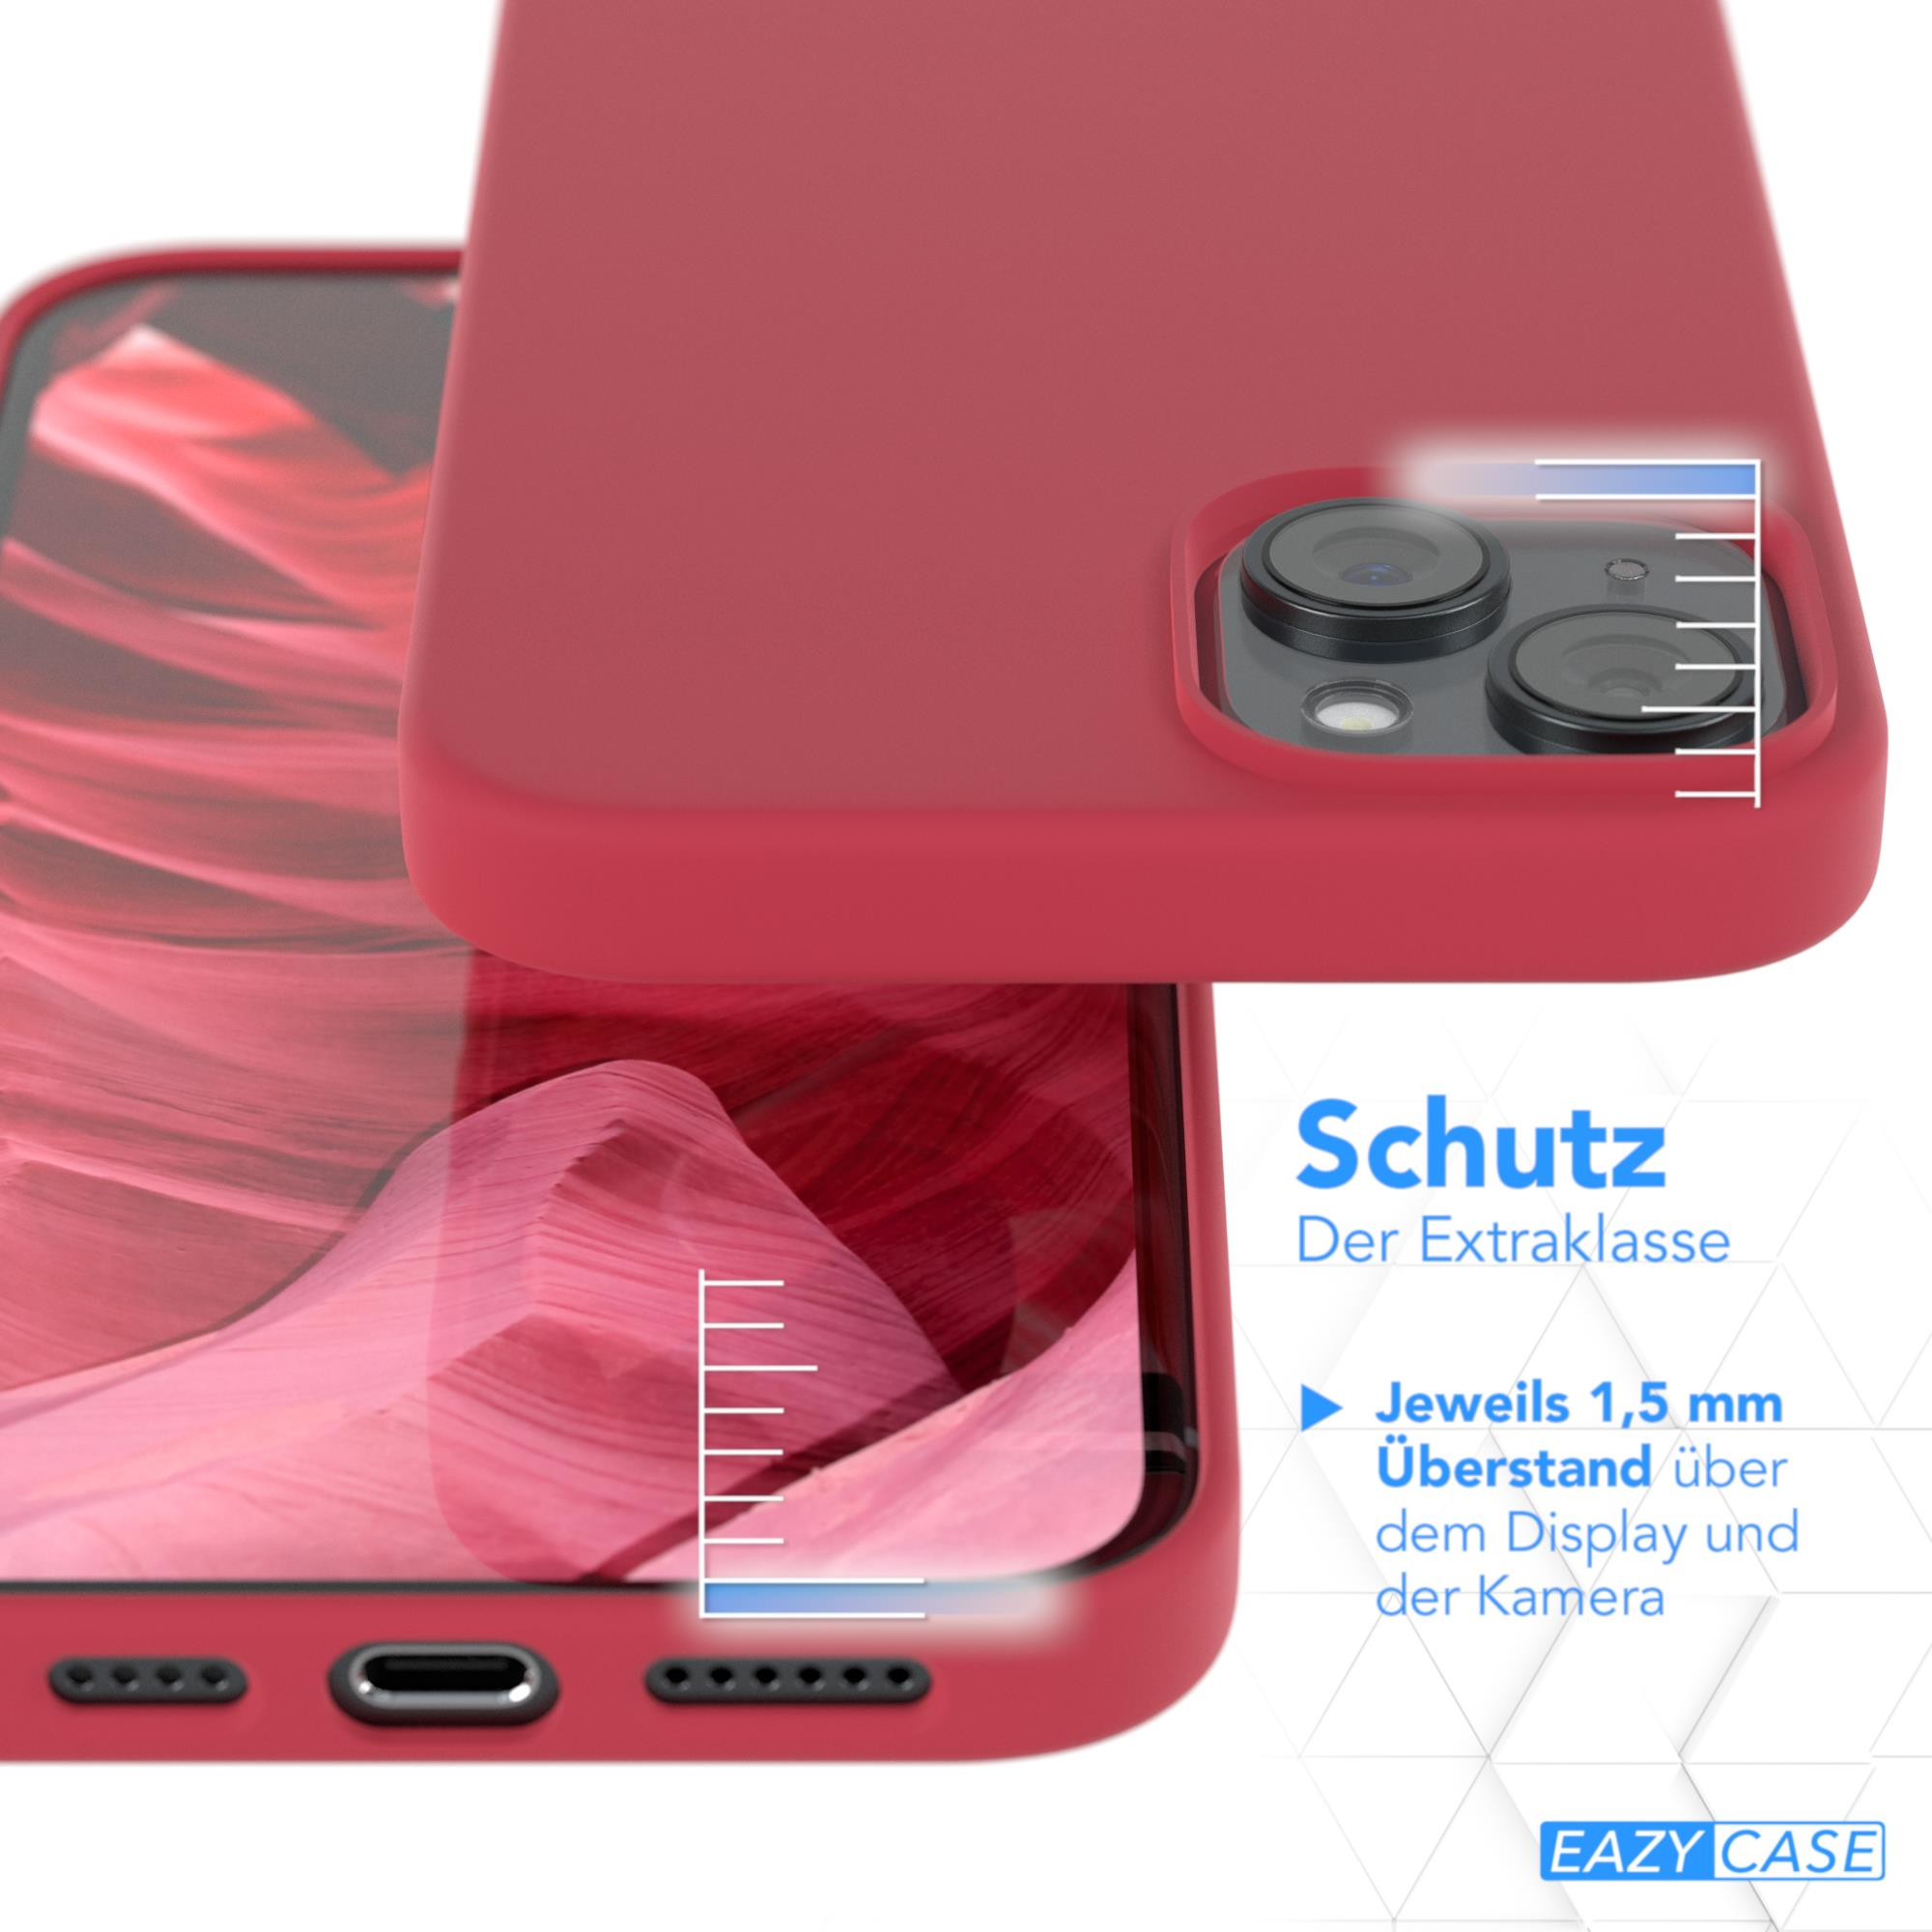 Plus, iPhone Premium Backcover, EAZY 15 Handycase Silikon Beere Rot CASE Apple, MagSafe, mit /